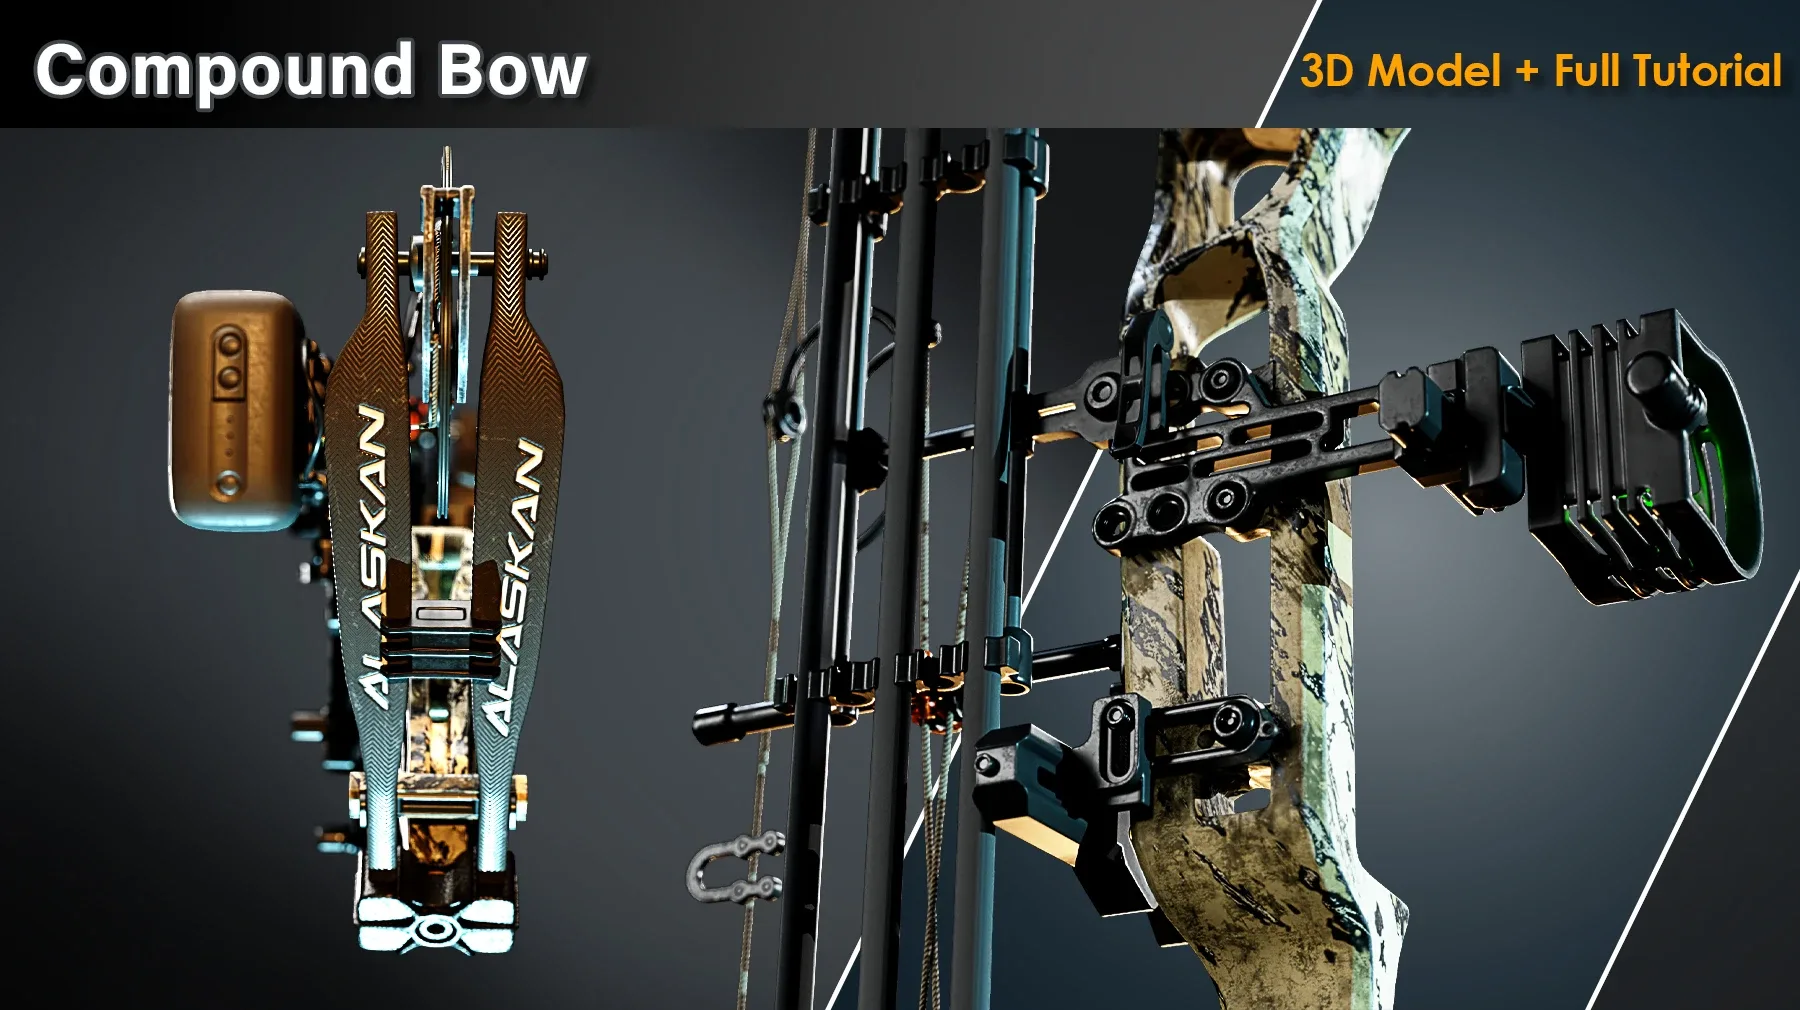 Compound Bow / 3D Model + Full Tutorial